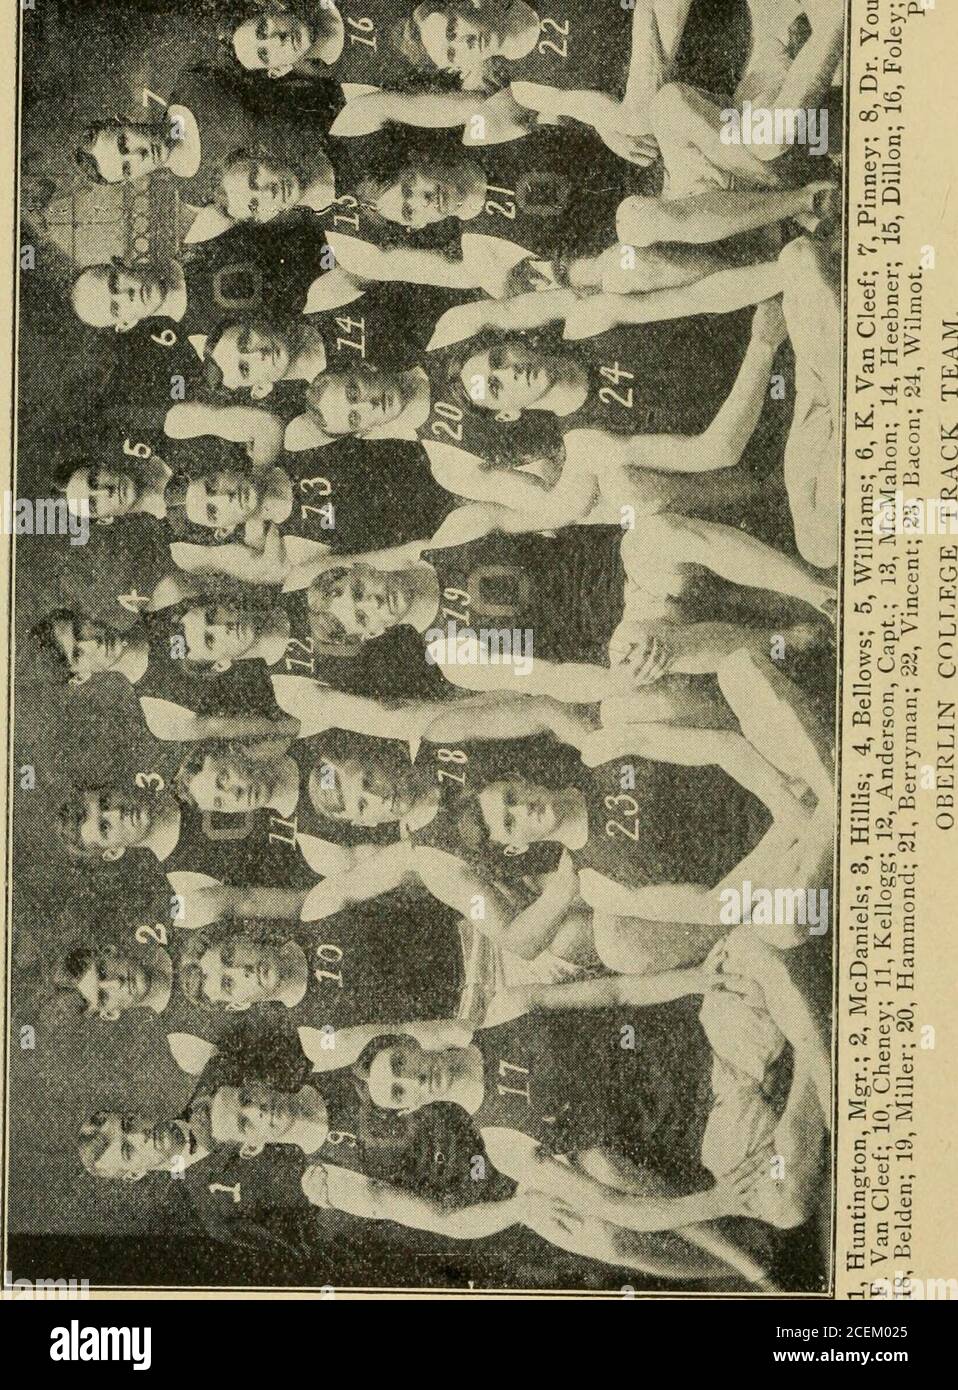 . Spalding's official athletic almanac. ldon.N.YA.C, 30 ft. 11 in. 1899, J. Flanagan, N. Y. A. C, 33 ft. 7 1-4 in. 1900, J. S. Mitchel, H. R. C, 35 ft. 5 In. ; 1901, John Flanagan, N. Y.A. C, 30 ft. 6 in.; 1902, E. Desmarteau, Montreal A. A. A., 33 ft. 6 in.;1903, J. S. Mitchel, N.Y.A.C, 33 ft. 2 3-4 In. Throwing the Discus weighing 414 pounds from a 7-foot circle, with-out follow—1897, C H. Hennemann, C.A.A., 118 ft. 9 in. 1898, CH. Hennemann, Chicago A.A., 108 ft. 8% in. 1899, R. Sheldon, N.Y. A. C—Discus short weight. 1900, R. Sheldon, N. Y. A. C, 114 ft. 1901, R. J. Sheridan, P. A, C, 111 Stock Photo